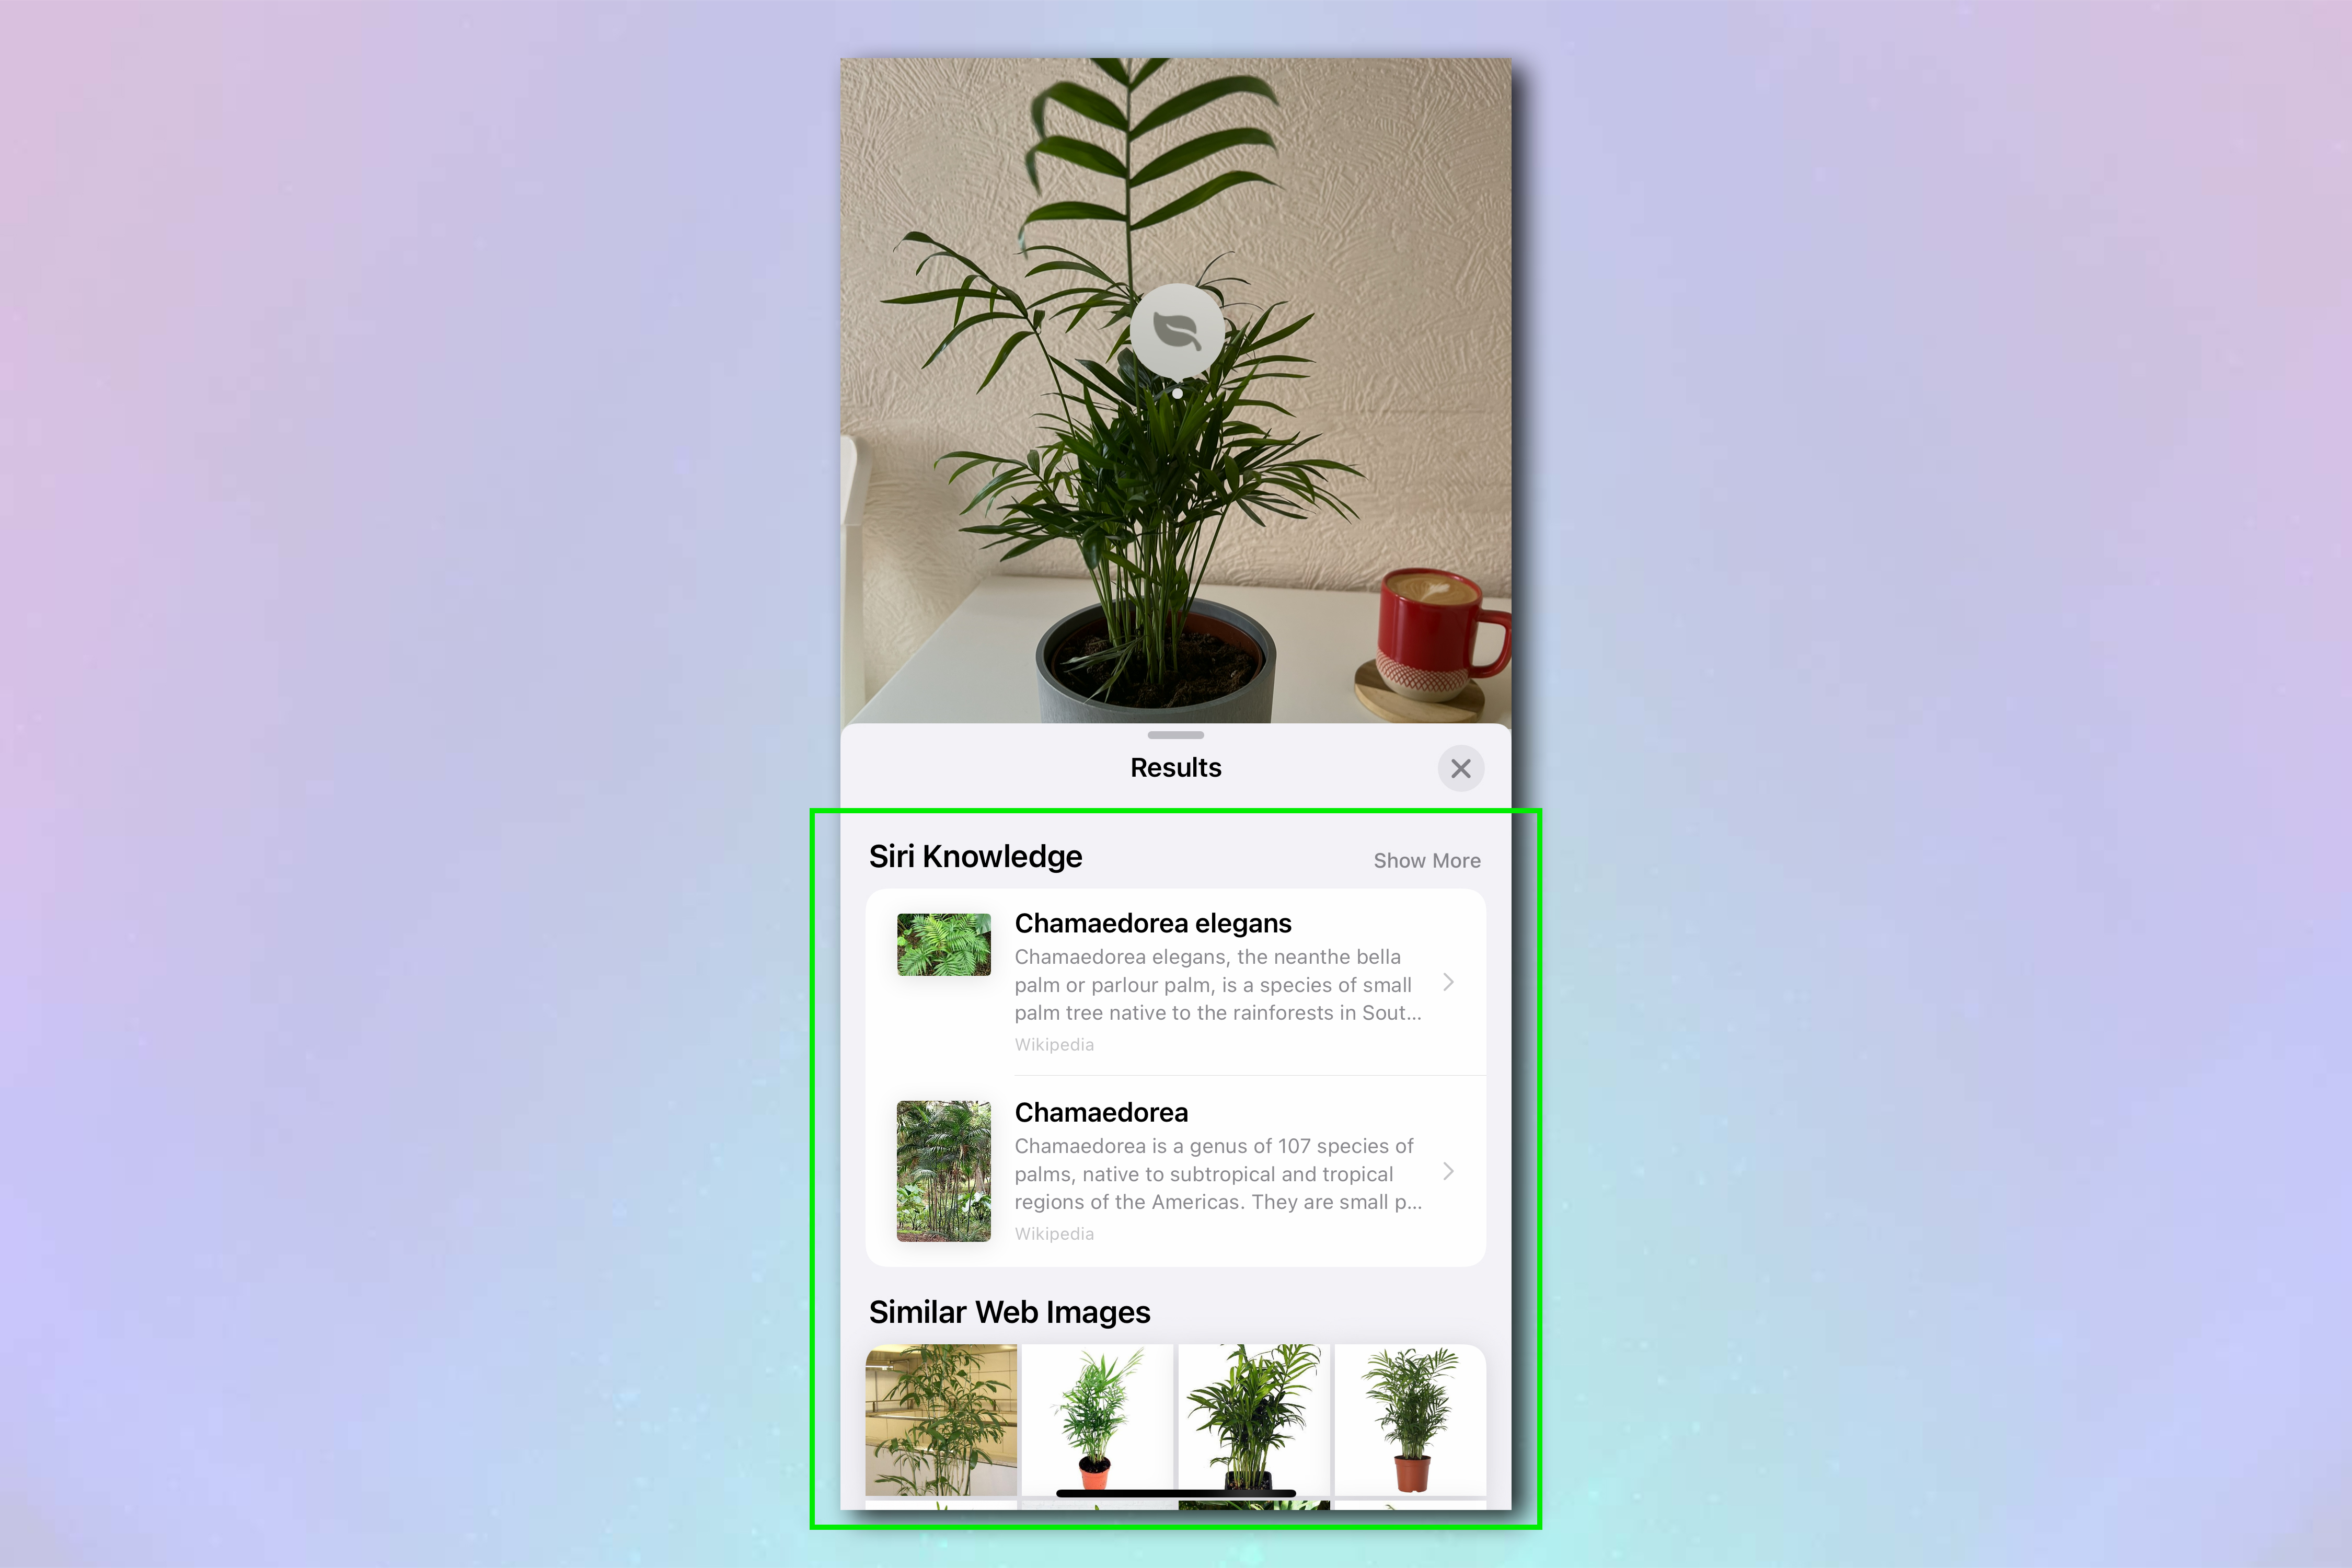 A screenshot of the iPhone image info panel after a visual search, showing online search results